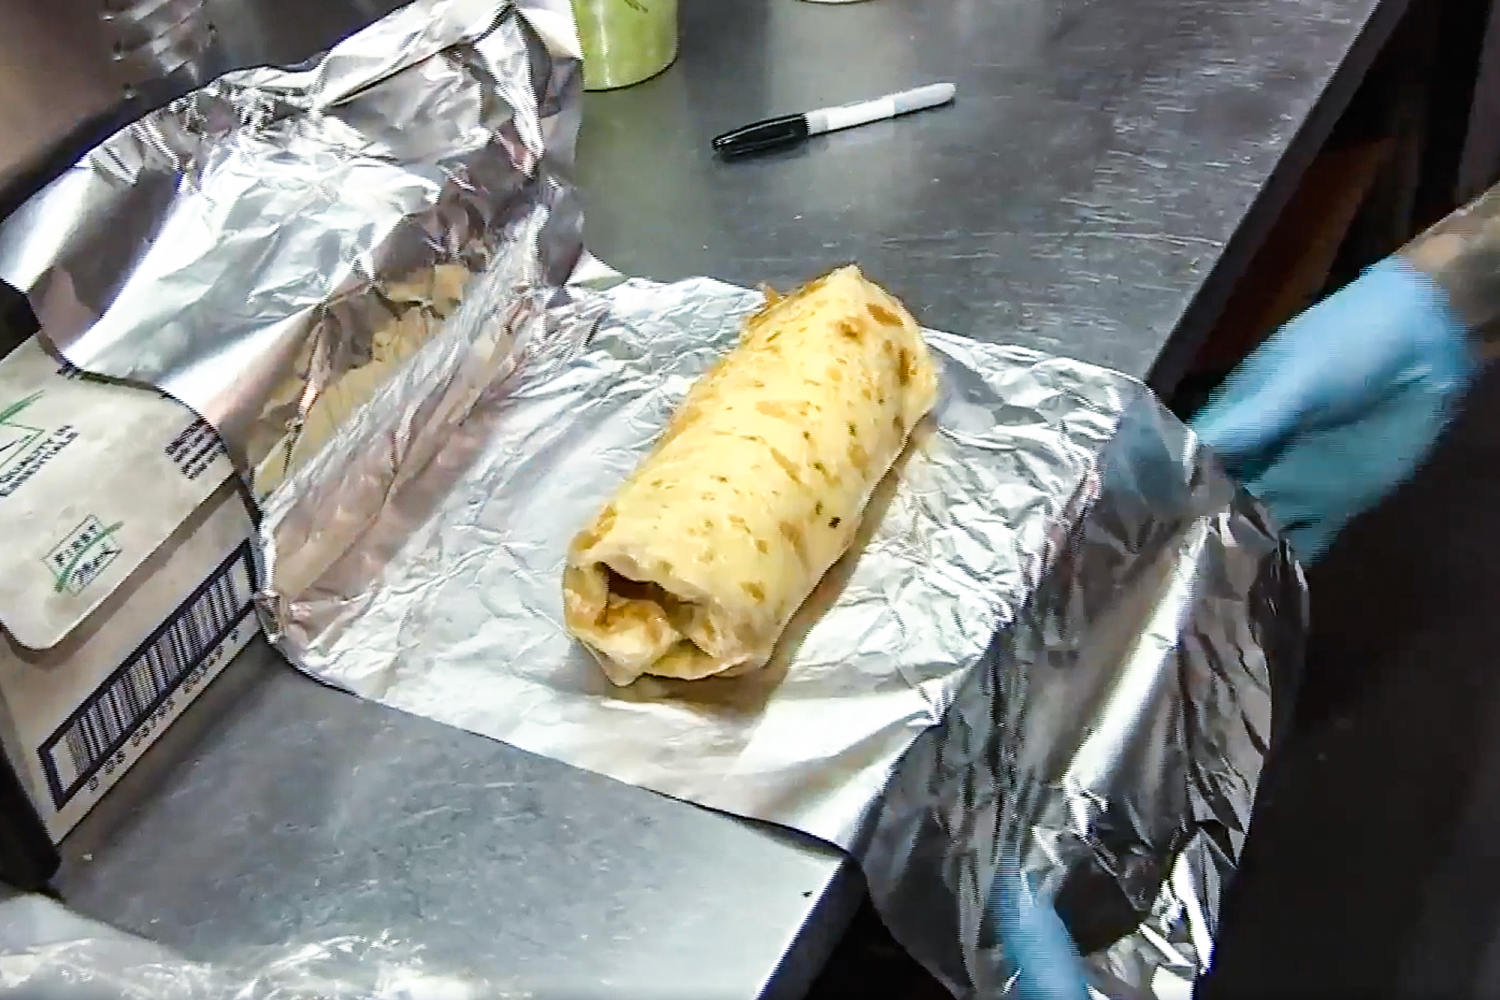 A $22 burrito? San Francisco restaurant owner says he's keeping up with inflation